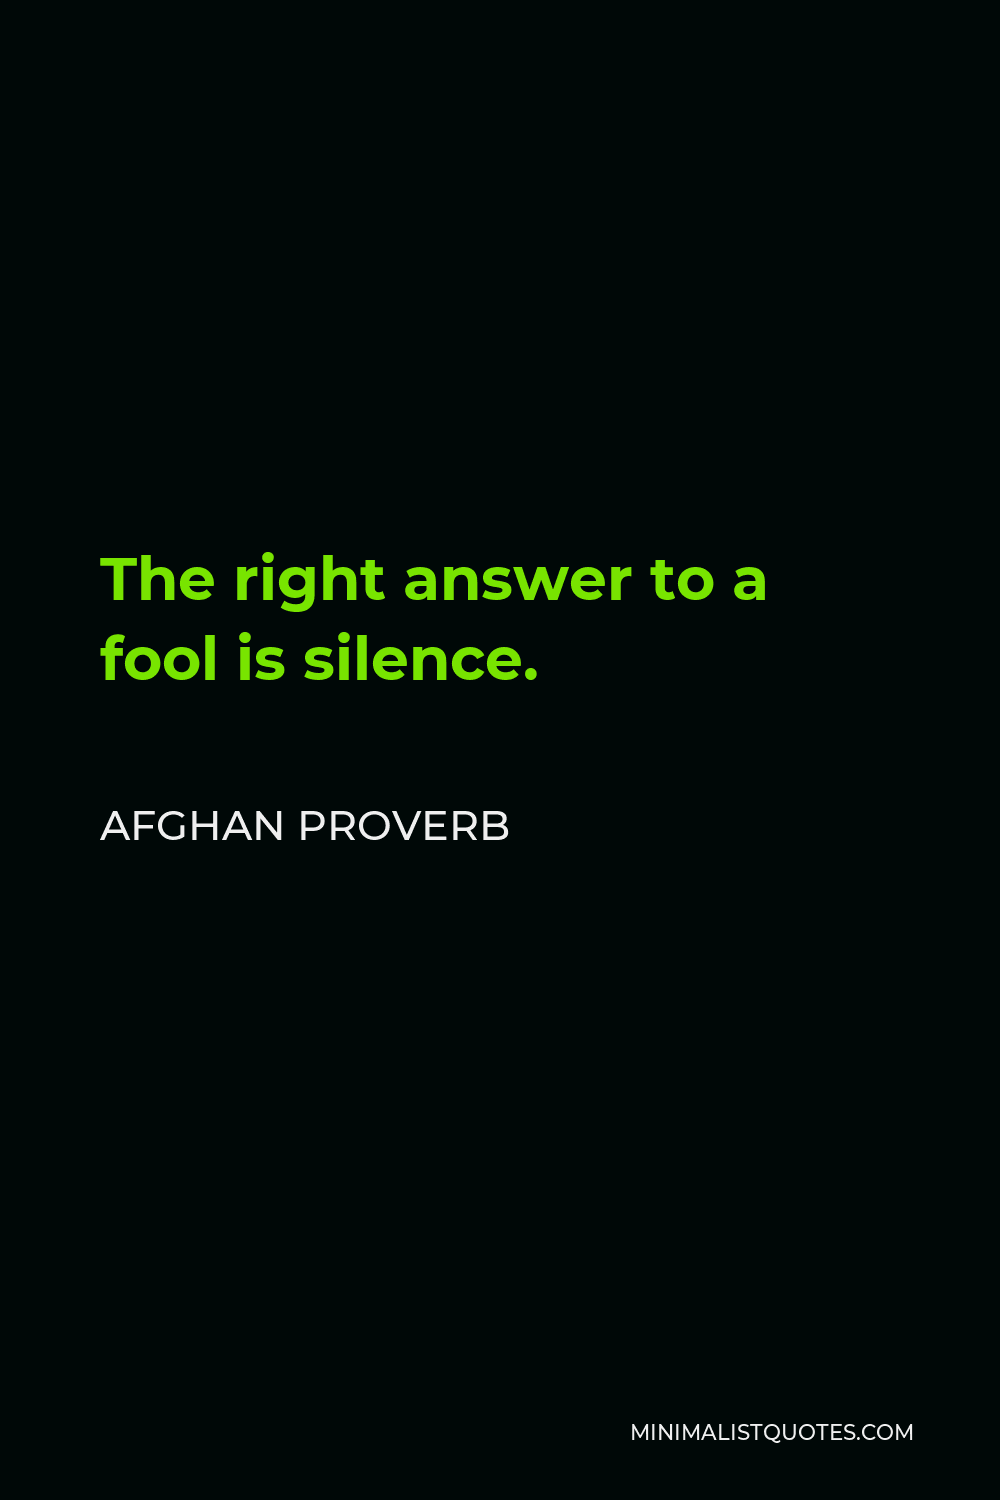 Afghan Proverb Quote - The right answer to a fool is silence.